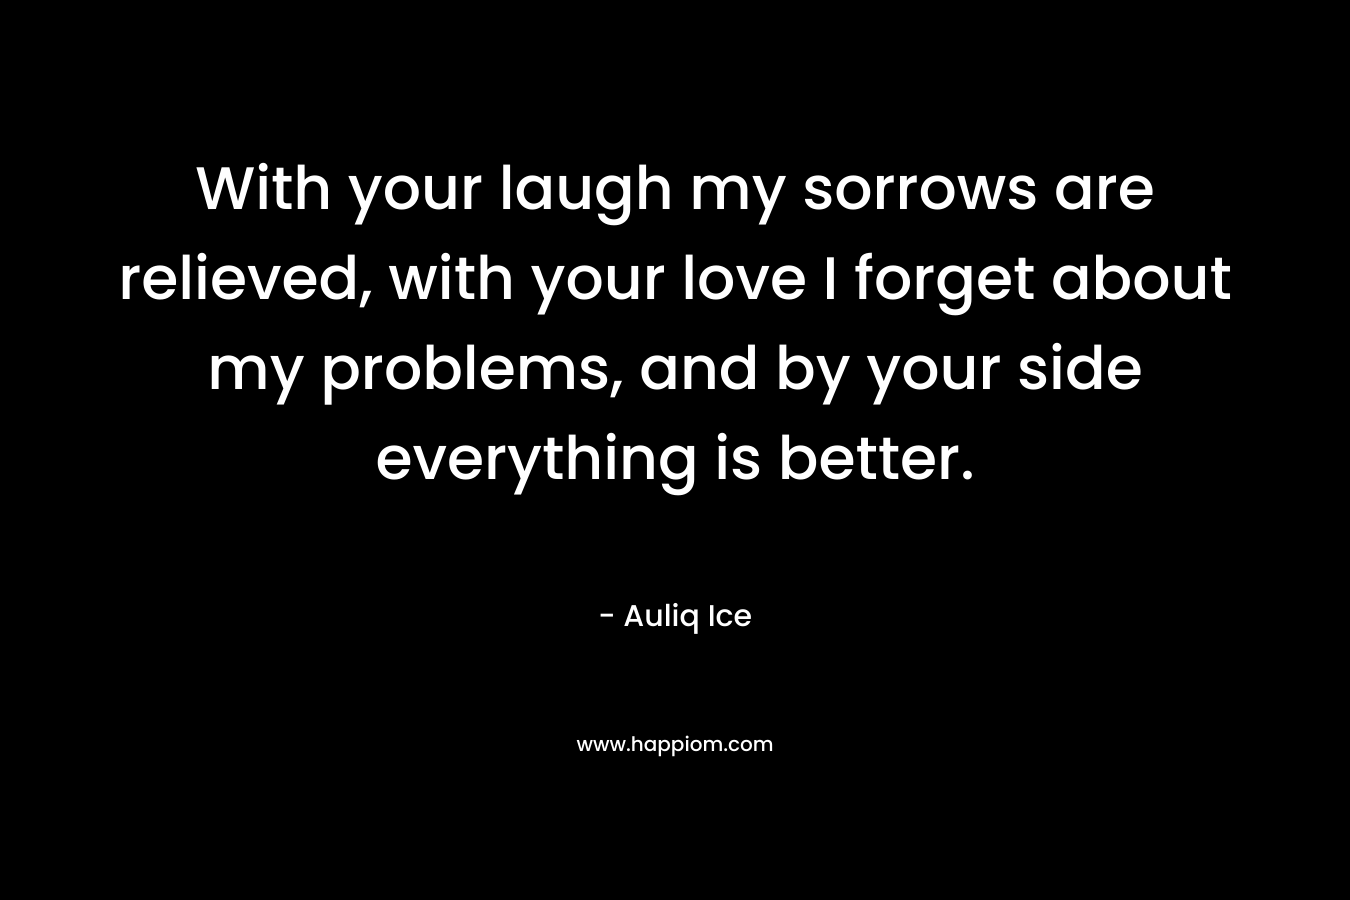 With your laugh my sorrows are relieved, with your love I forget about my problems, and by your side everything is better. – Auliq Ice